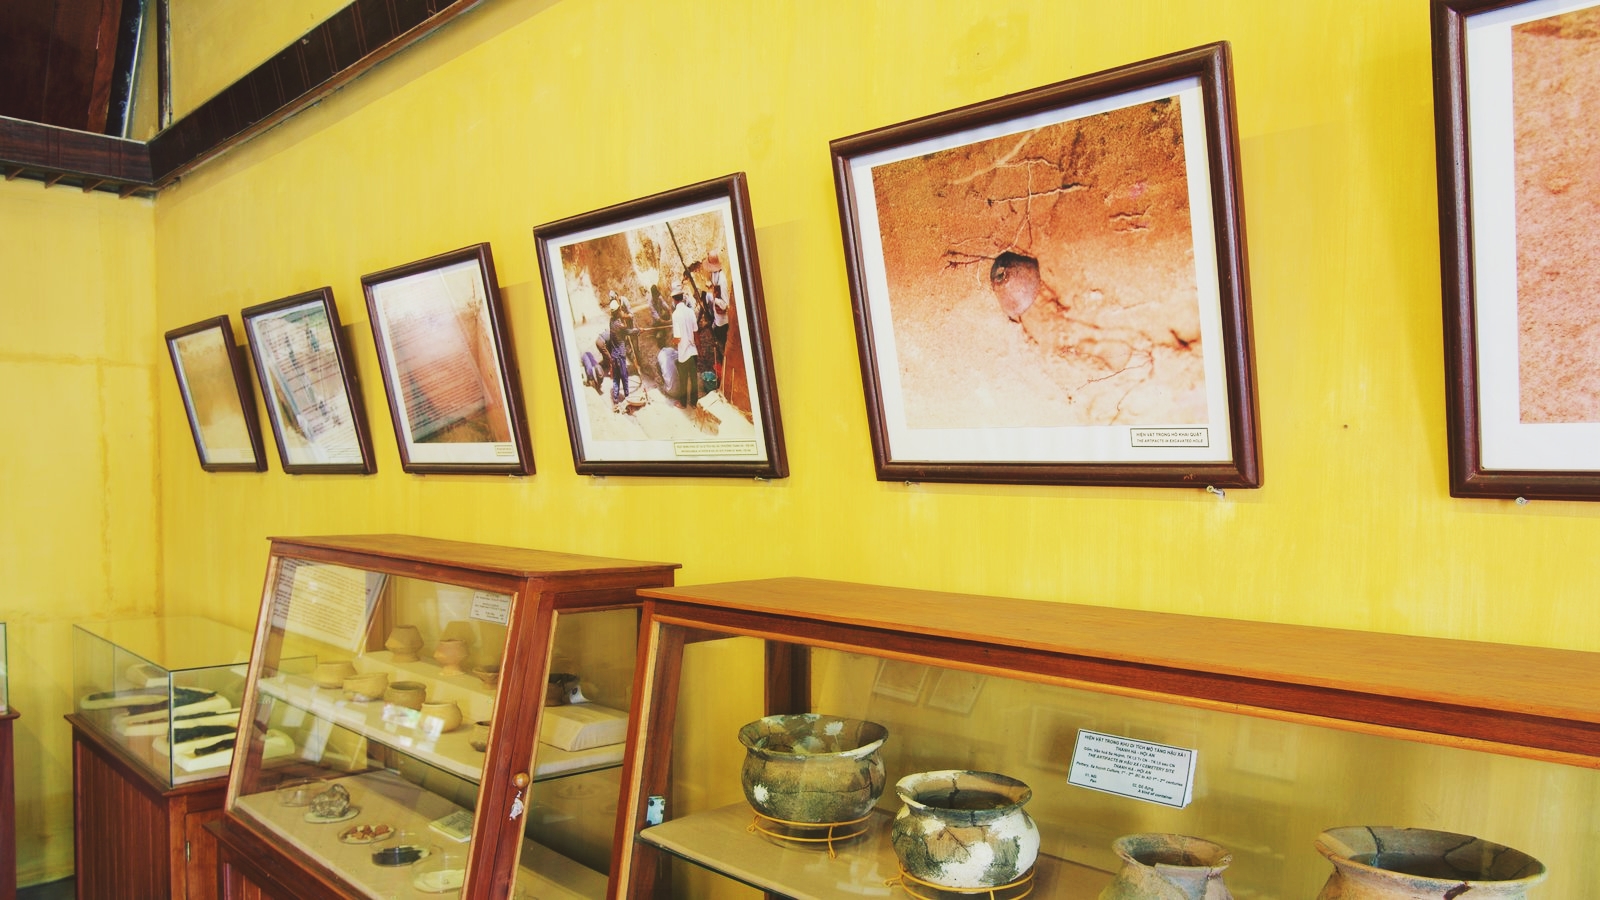 Second Floor Museum of Sa Huynh Culture